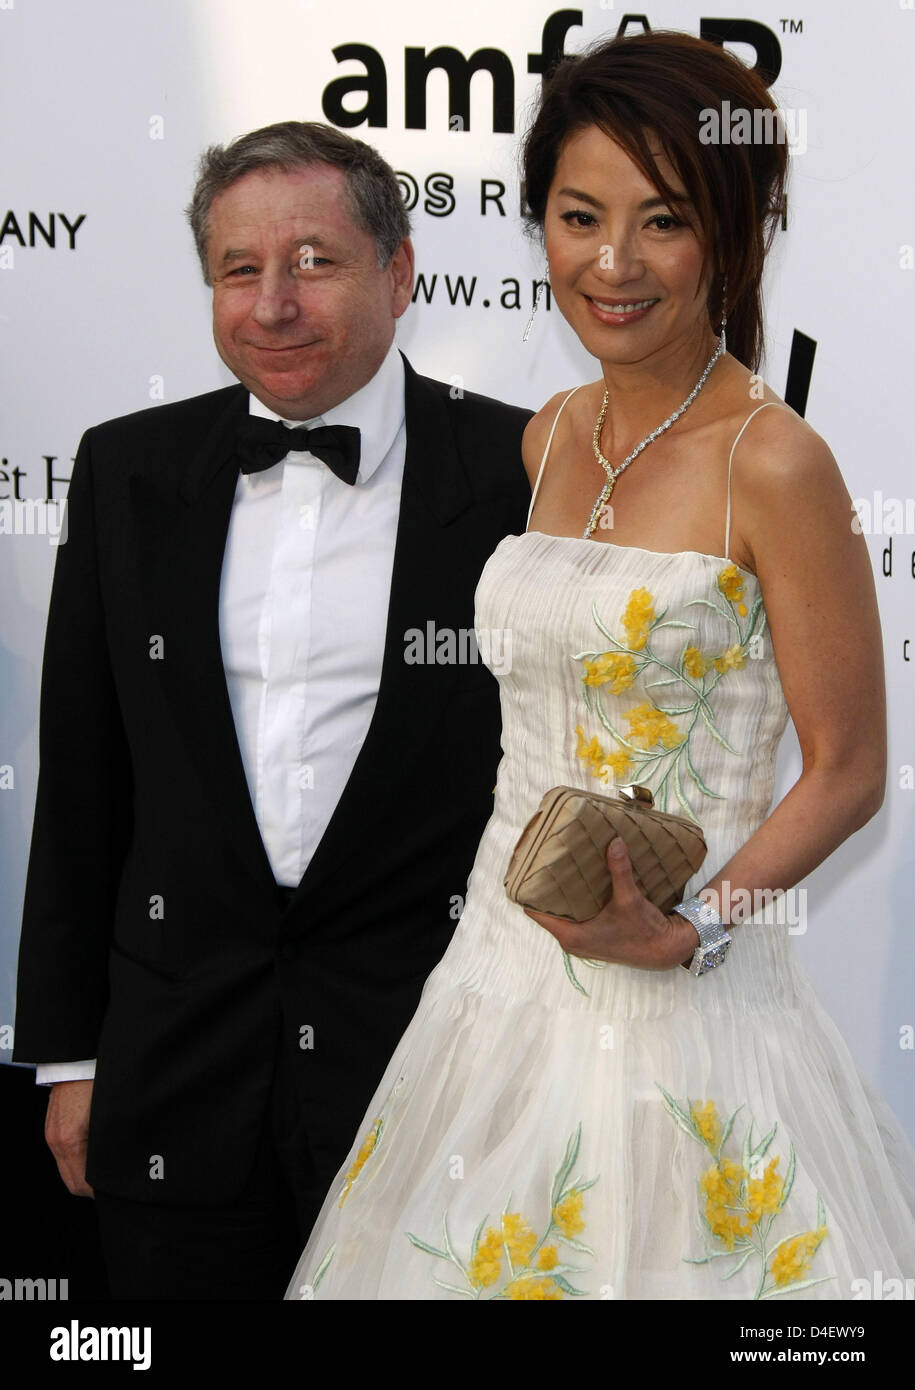 Jean Todd and Michelle Yeoh arrive at the amfAR Cinema Against Aids Gala at the 61st Cannes Film Festival in Cannes, France, 22 May 2008. Photo: Hubert Boesl Stock Photo